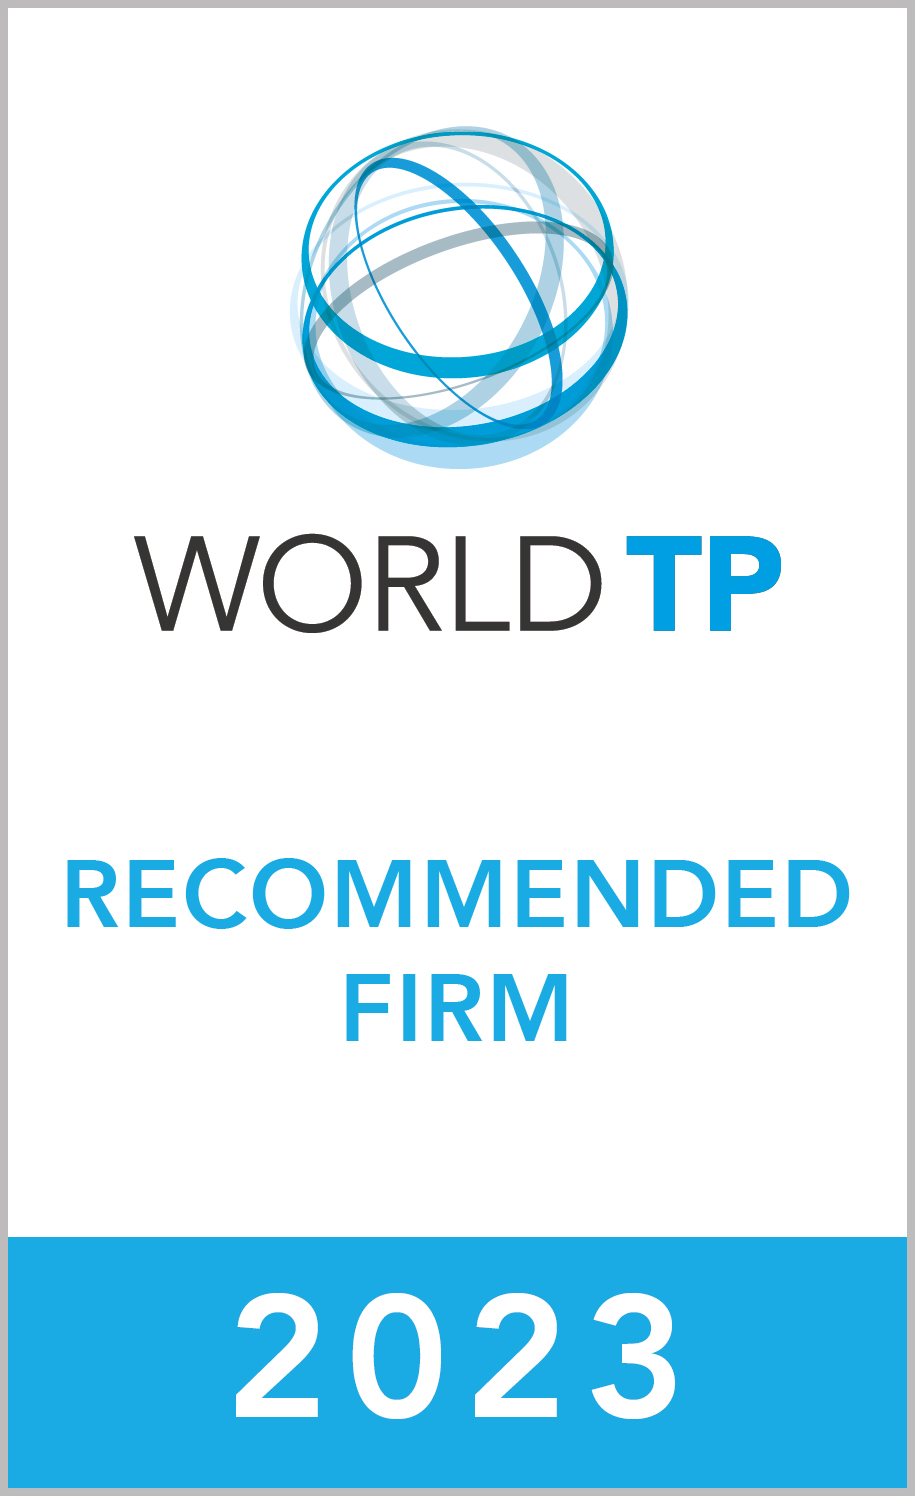 Transfer Pricing Services with Image of a World TP recommended firm 